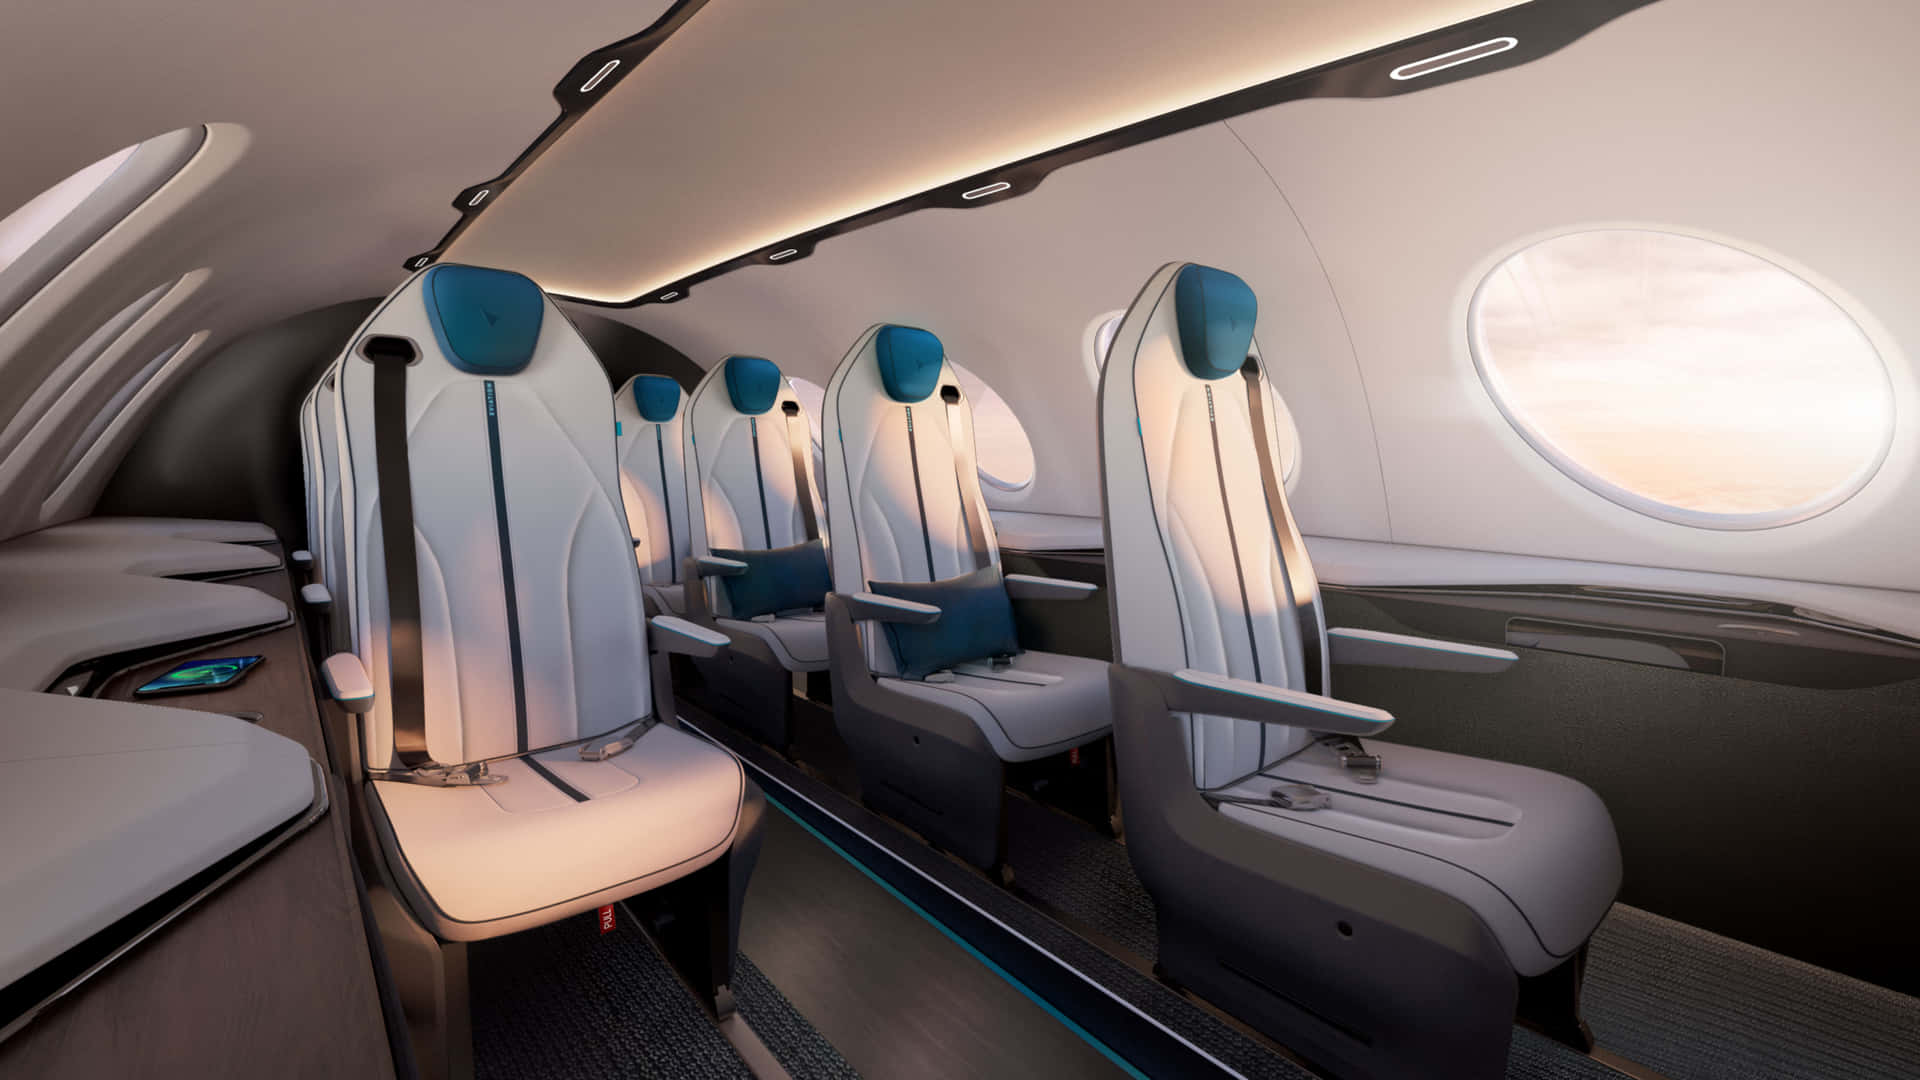 An Inside Look at the Eviation Alice Aircraft Model's Empty Seats. Wallpaper